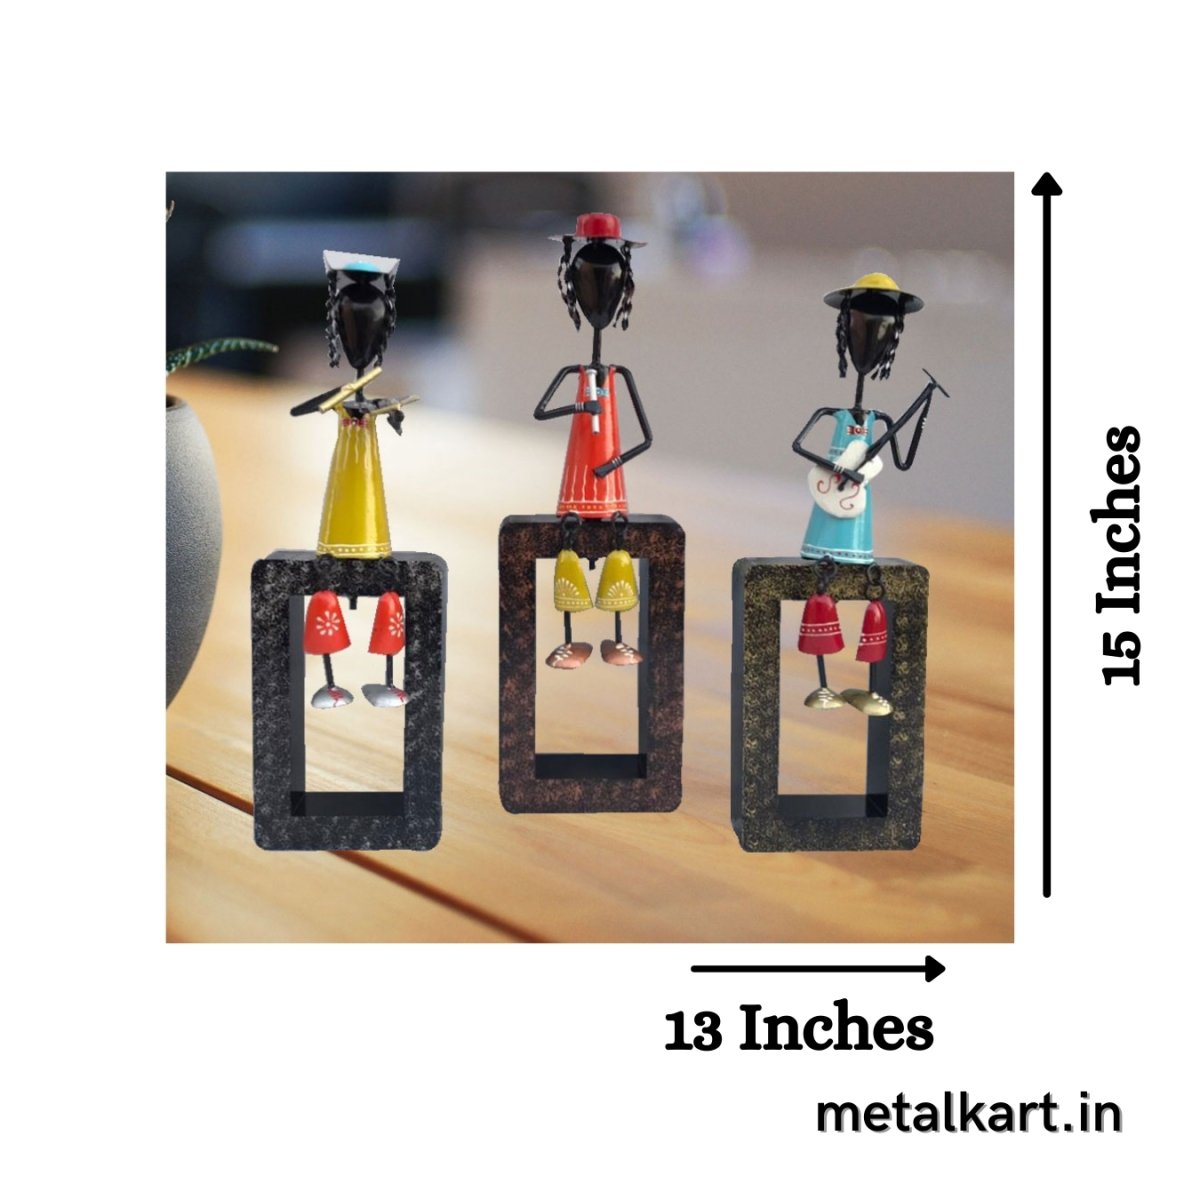 Metalkart Special Orchestra of 3 Colorful Musicians (15*03*13 Inches approx)